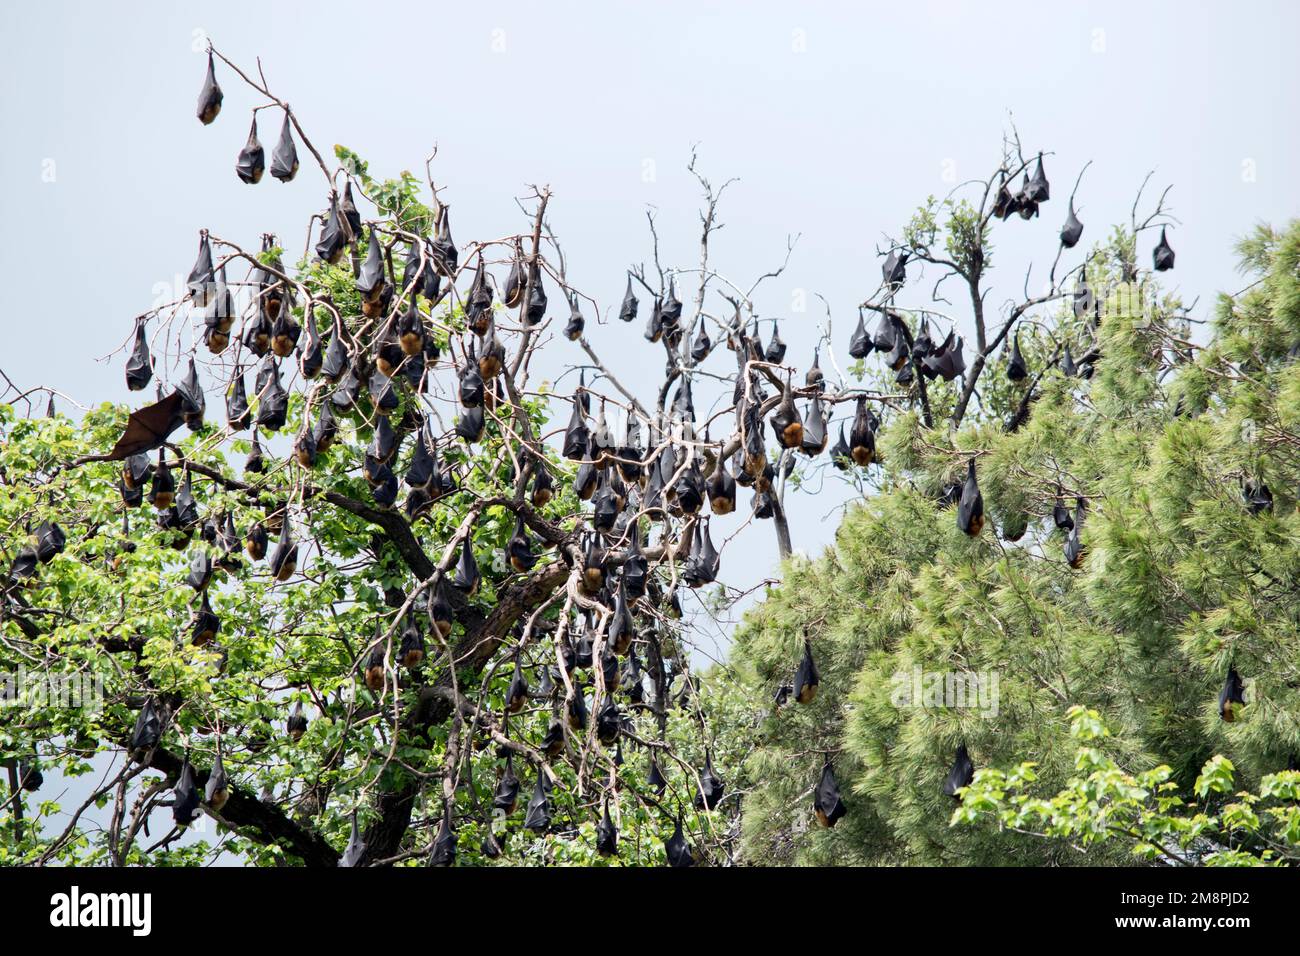 fruit bats have black wings and red furry heads and hang upside down from trees Stock Photo